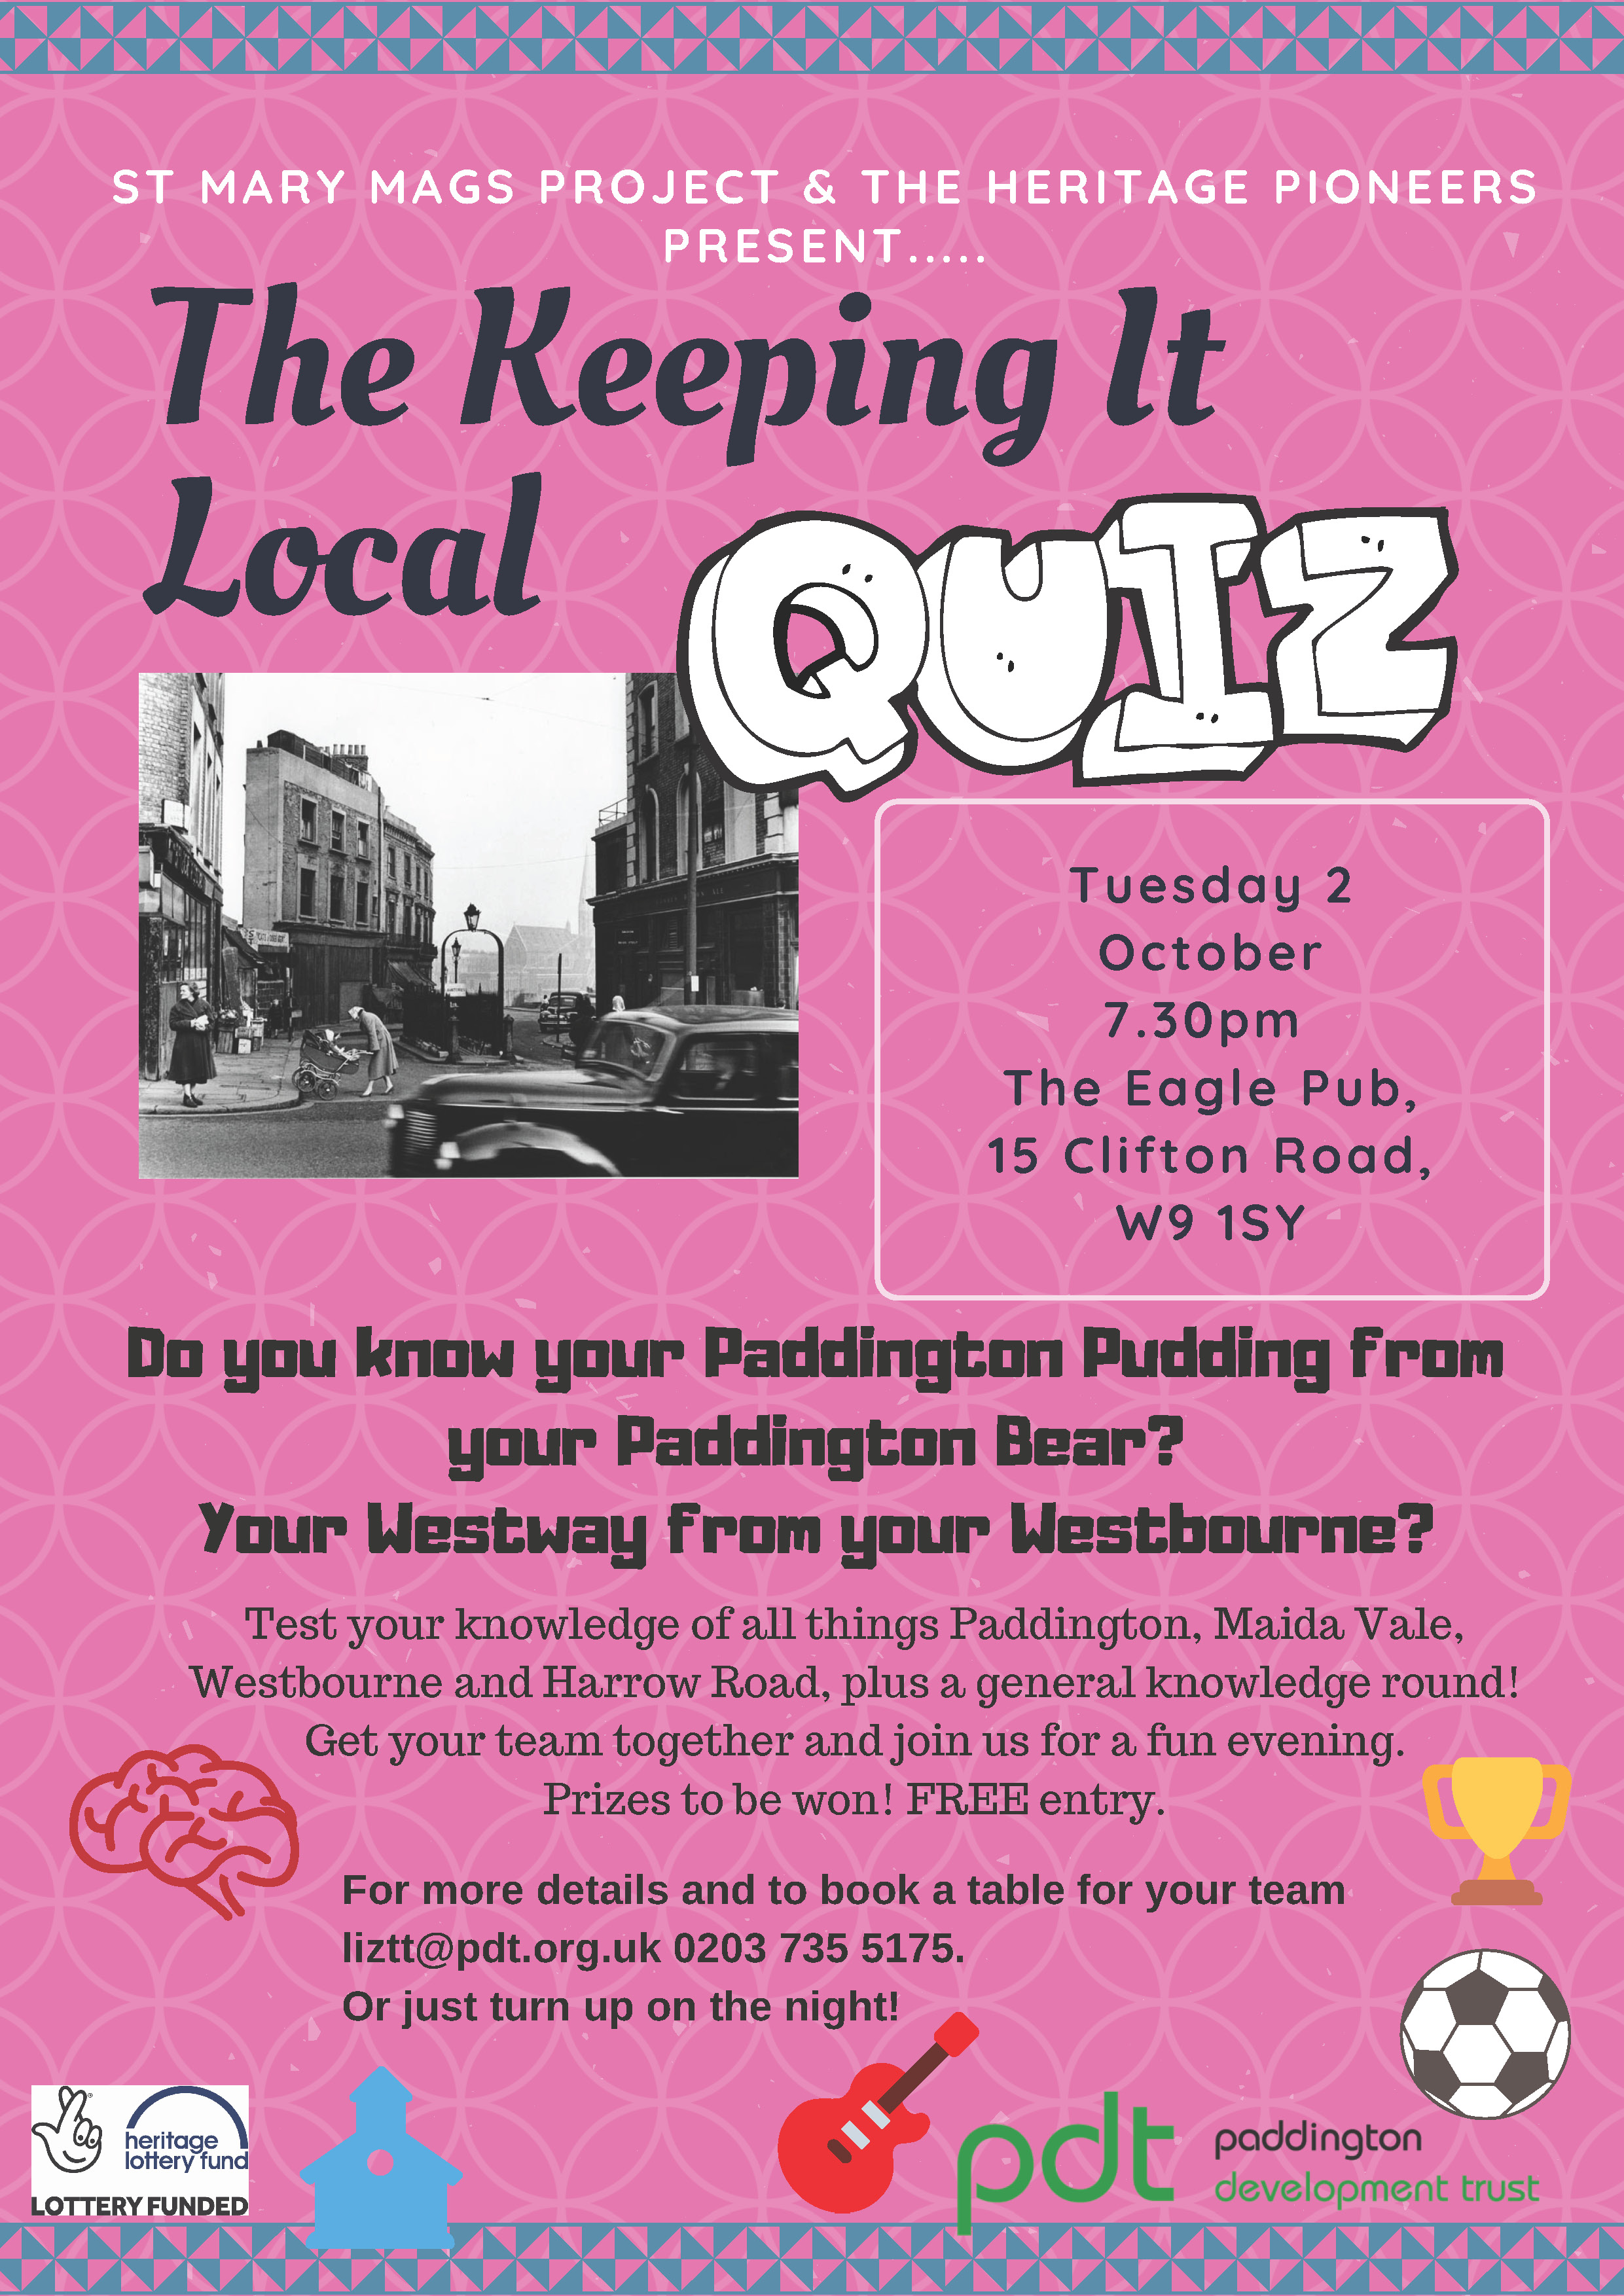 Mary Mags Pub Quiz flyer for event Tuesday 2 October 2018. 7.30 pm. The Eagle Pub, 15 Clifton Road, W9 1SY.